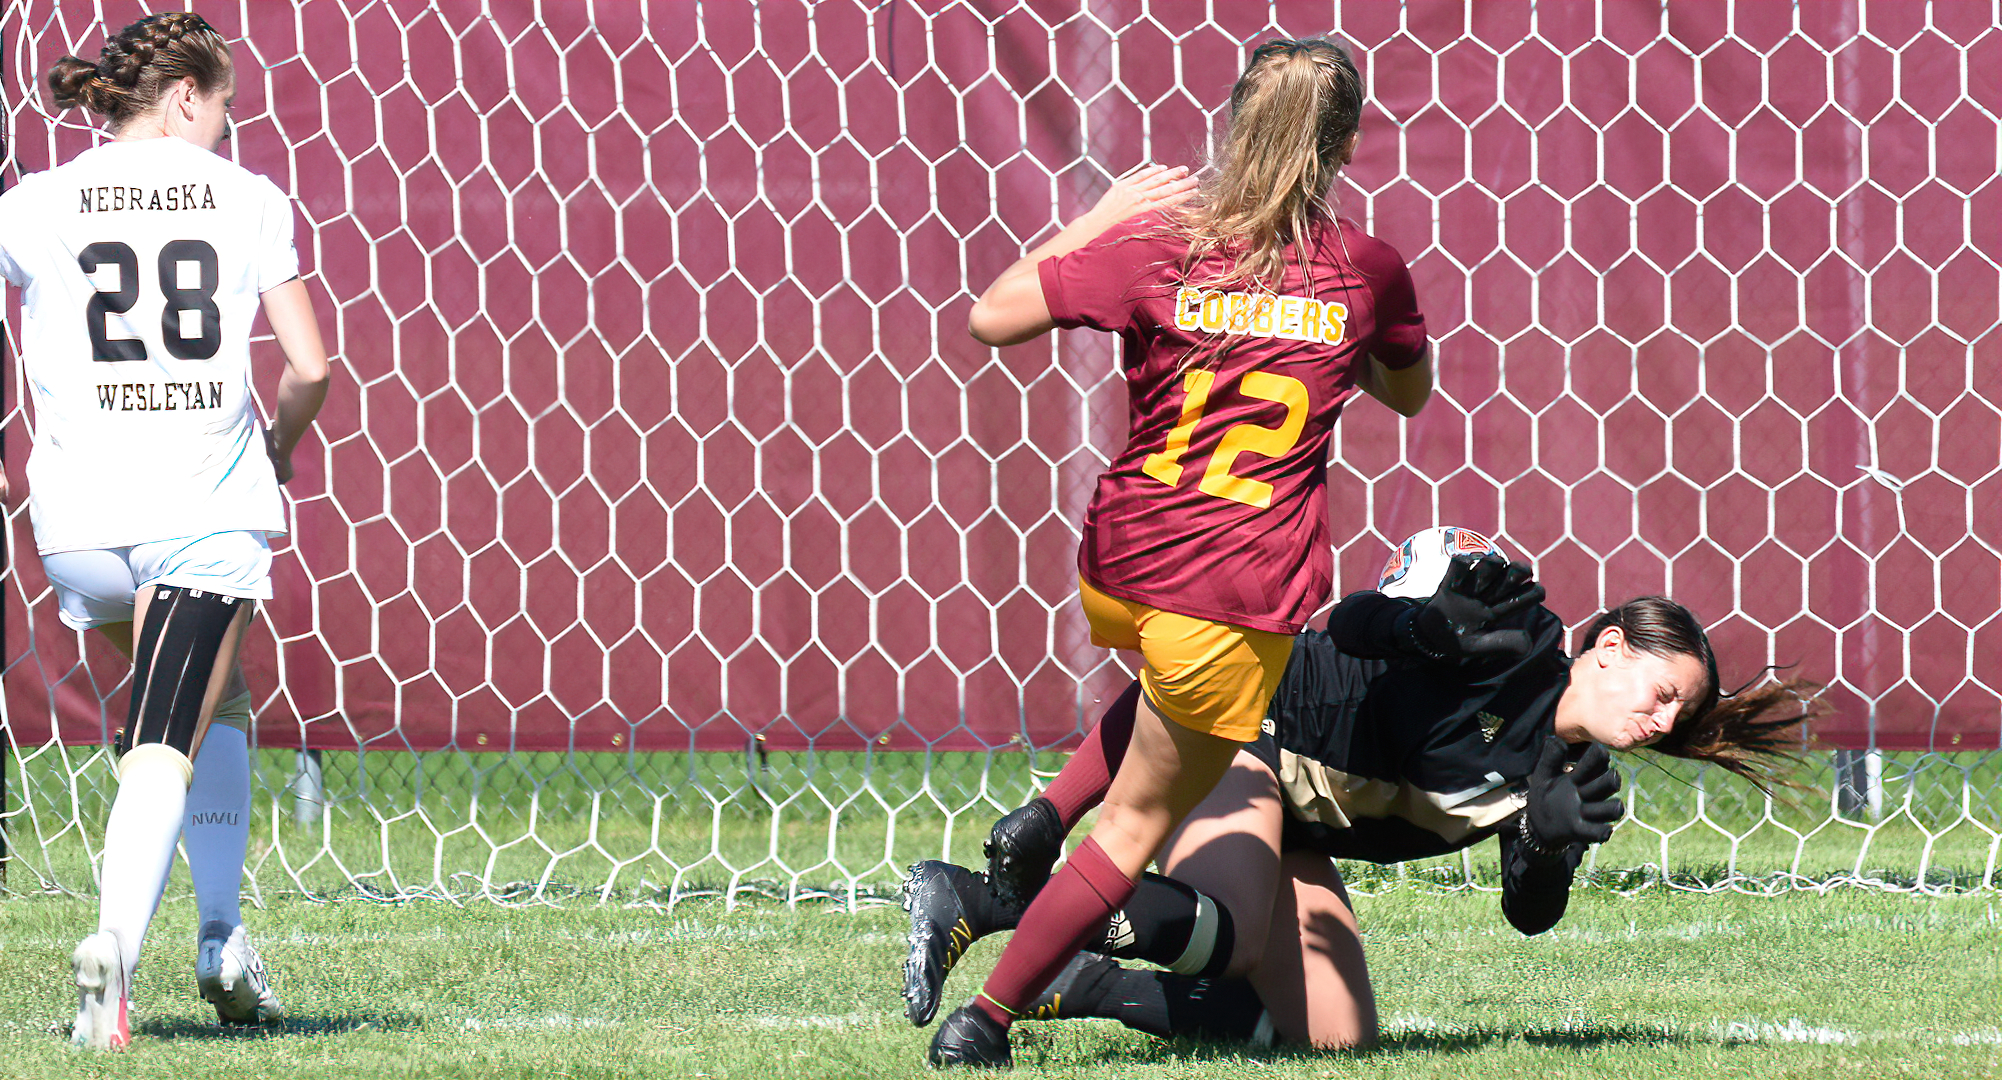 Freshman Amber Weibye sends the ball past the oncoming Neb. Wesleyan goalie for the game-winning goal in the Cobbers' 2-0 win over NWU.